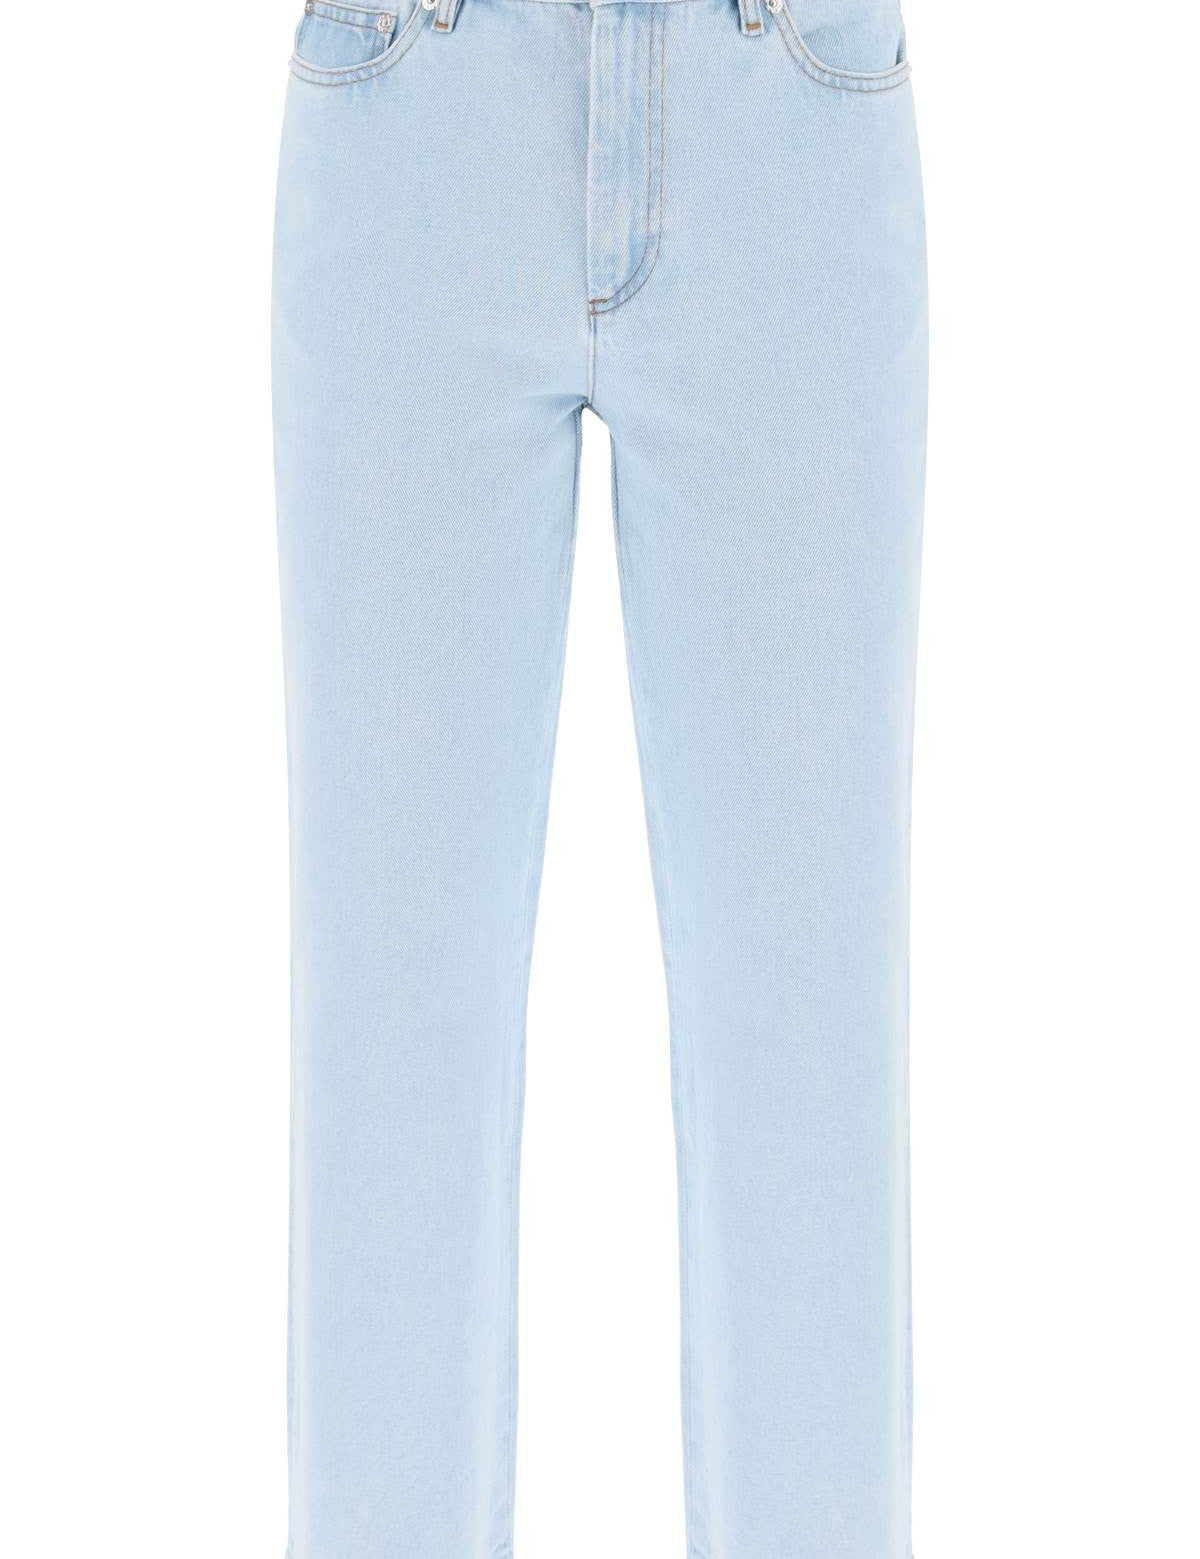 apc-new-sailor-straight-cut-cropped-jeans.jpg